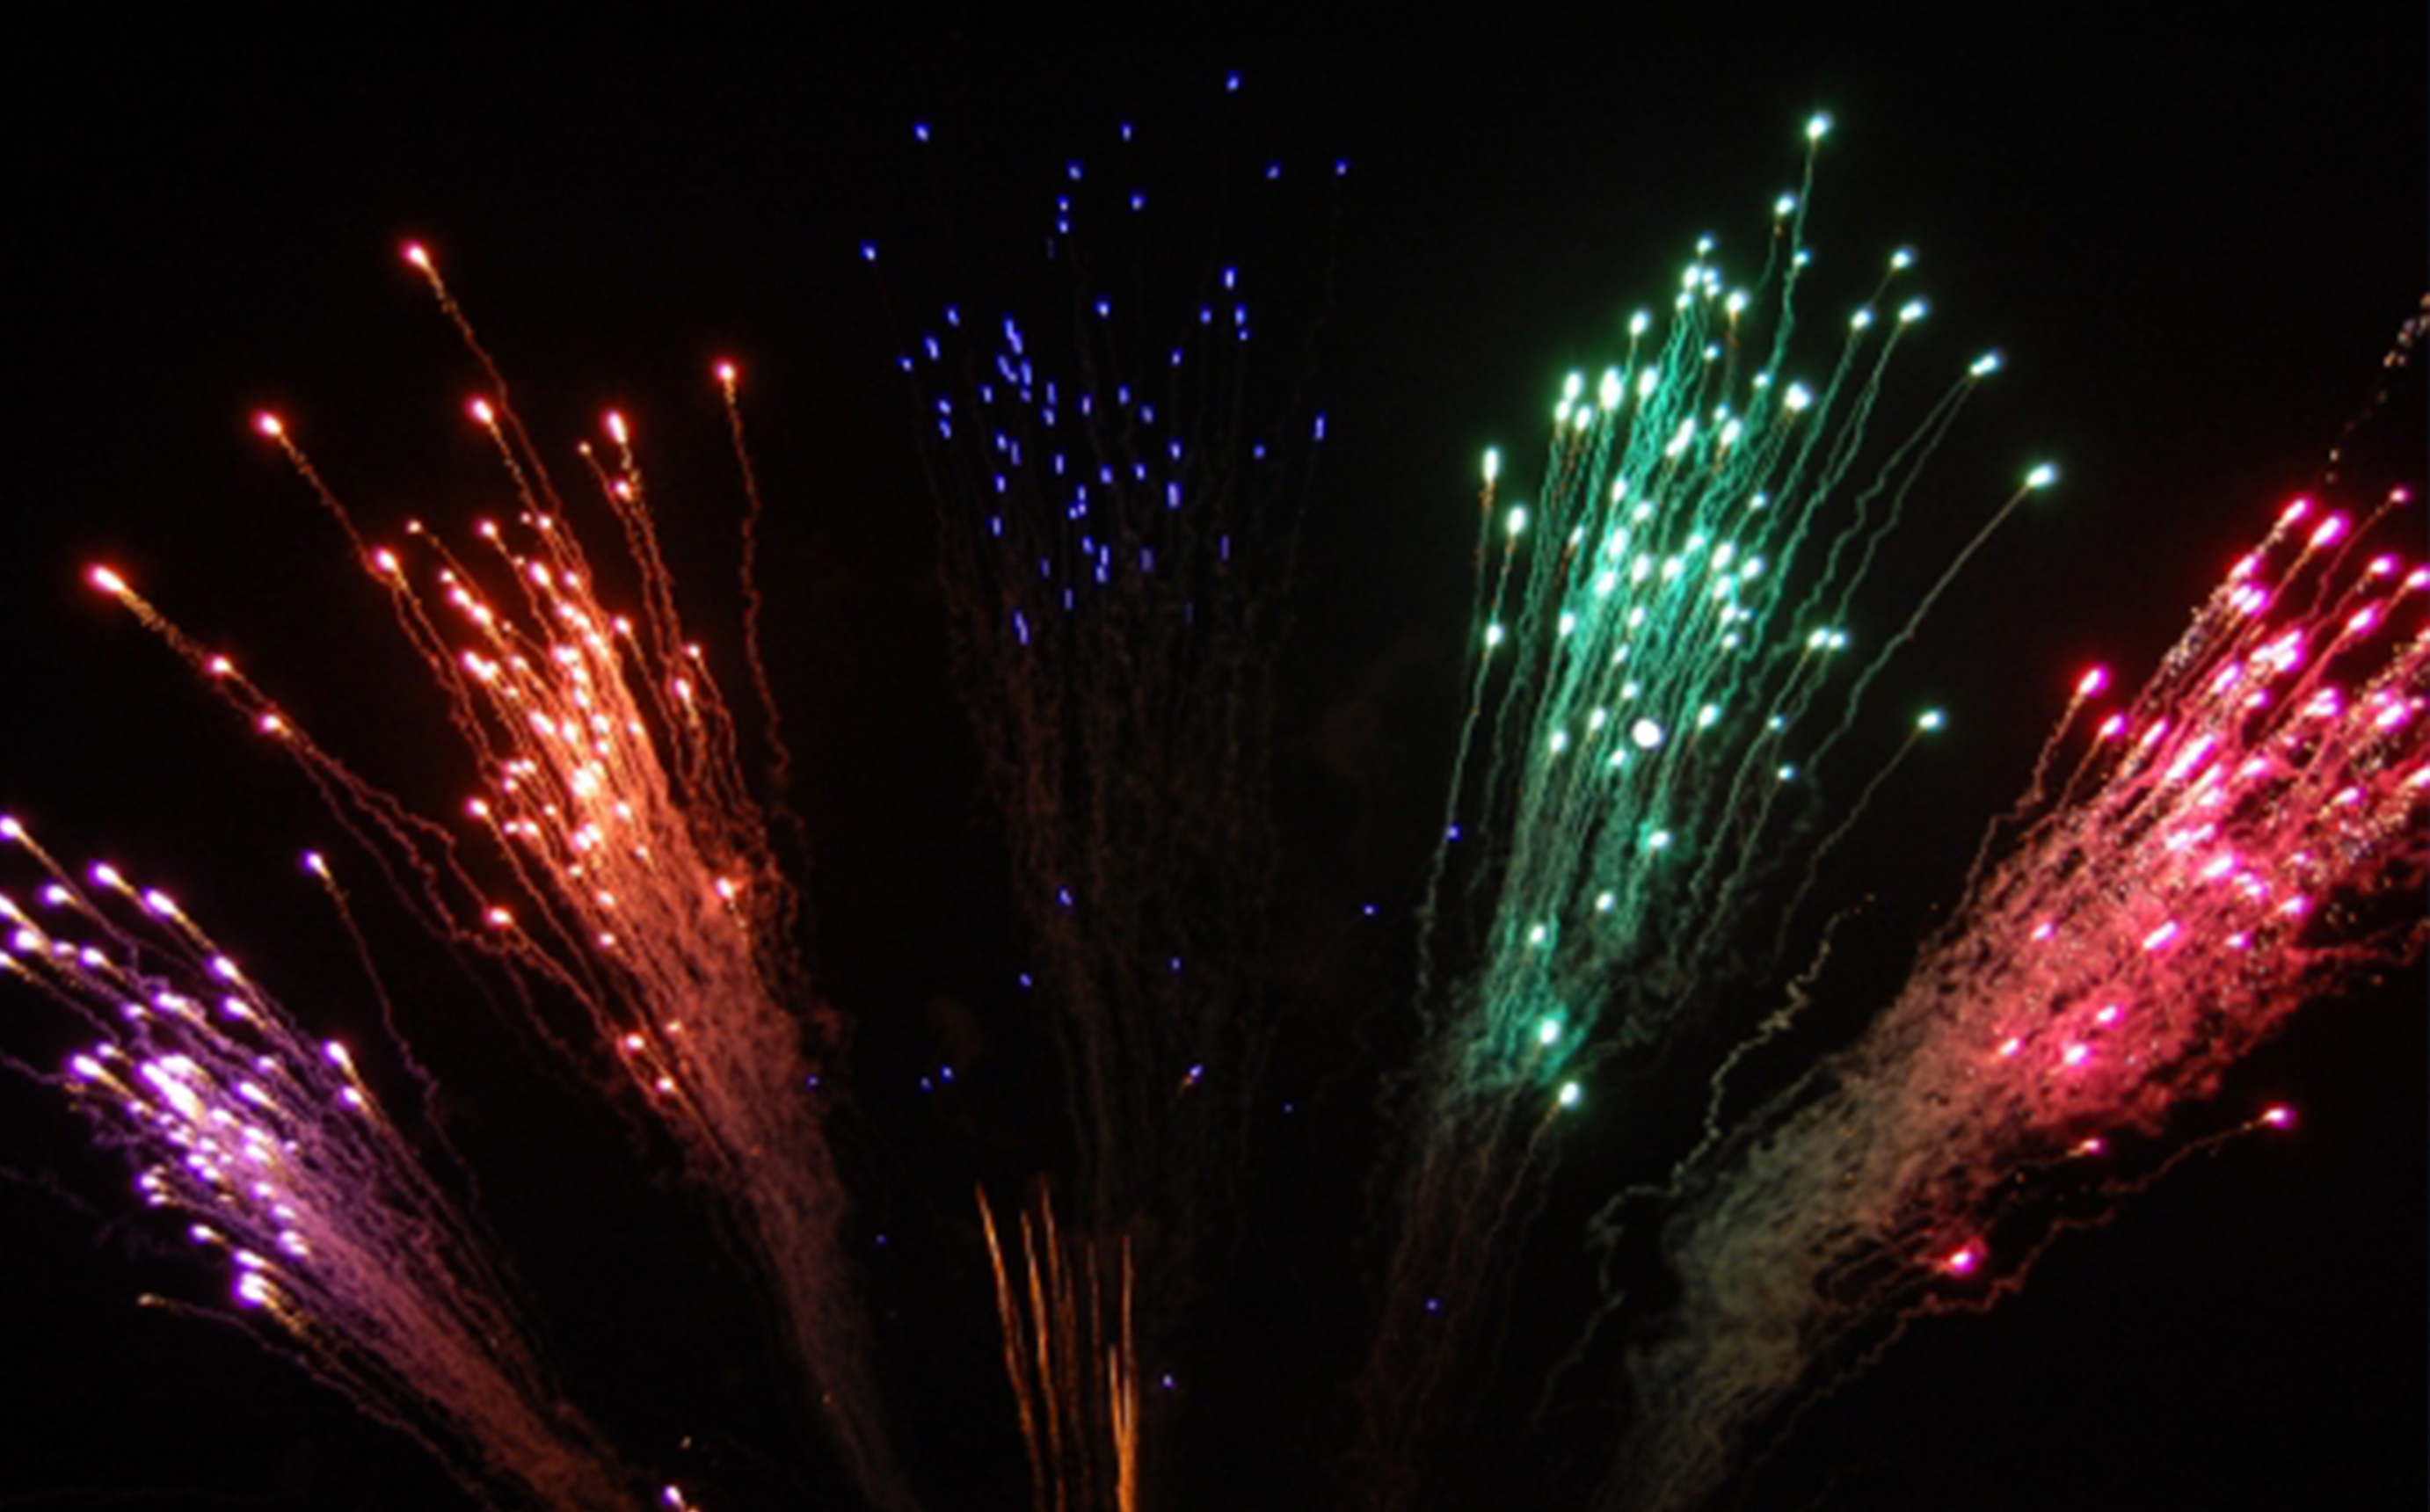 A Firework Solutions Limited display, with a multi-coloured fireworks